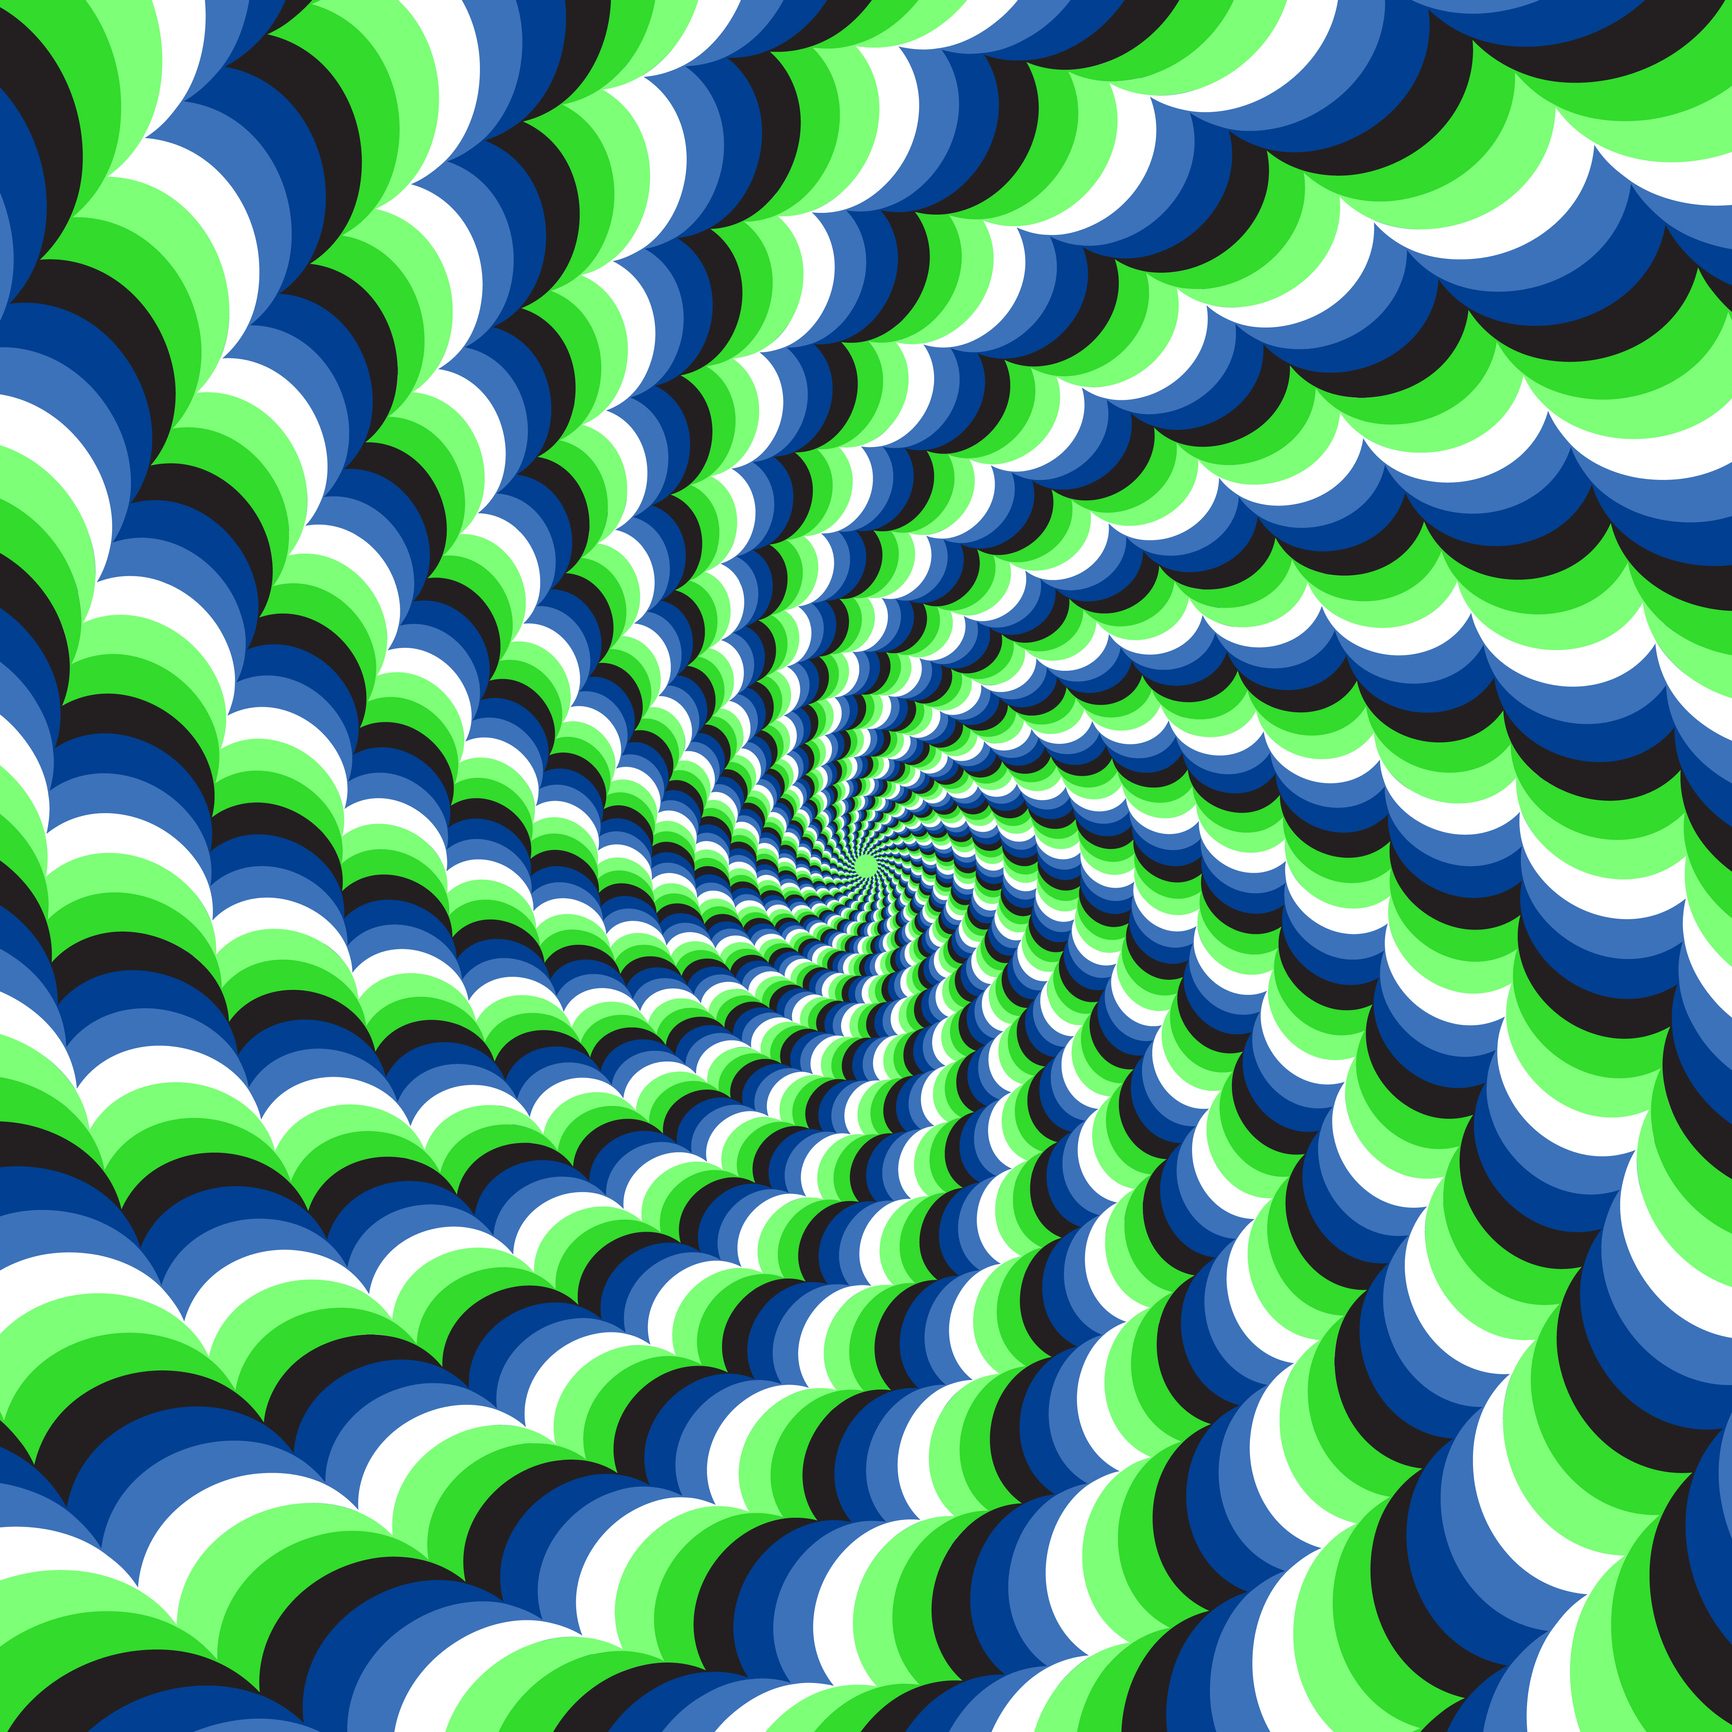 30 Optical Illusions That Will Make Your Brain Hurt Readers Digest